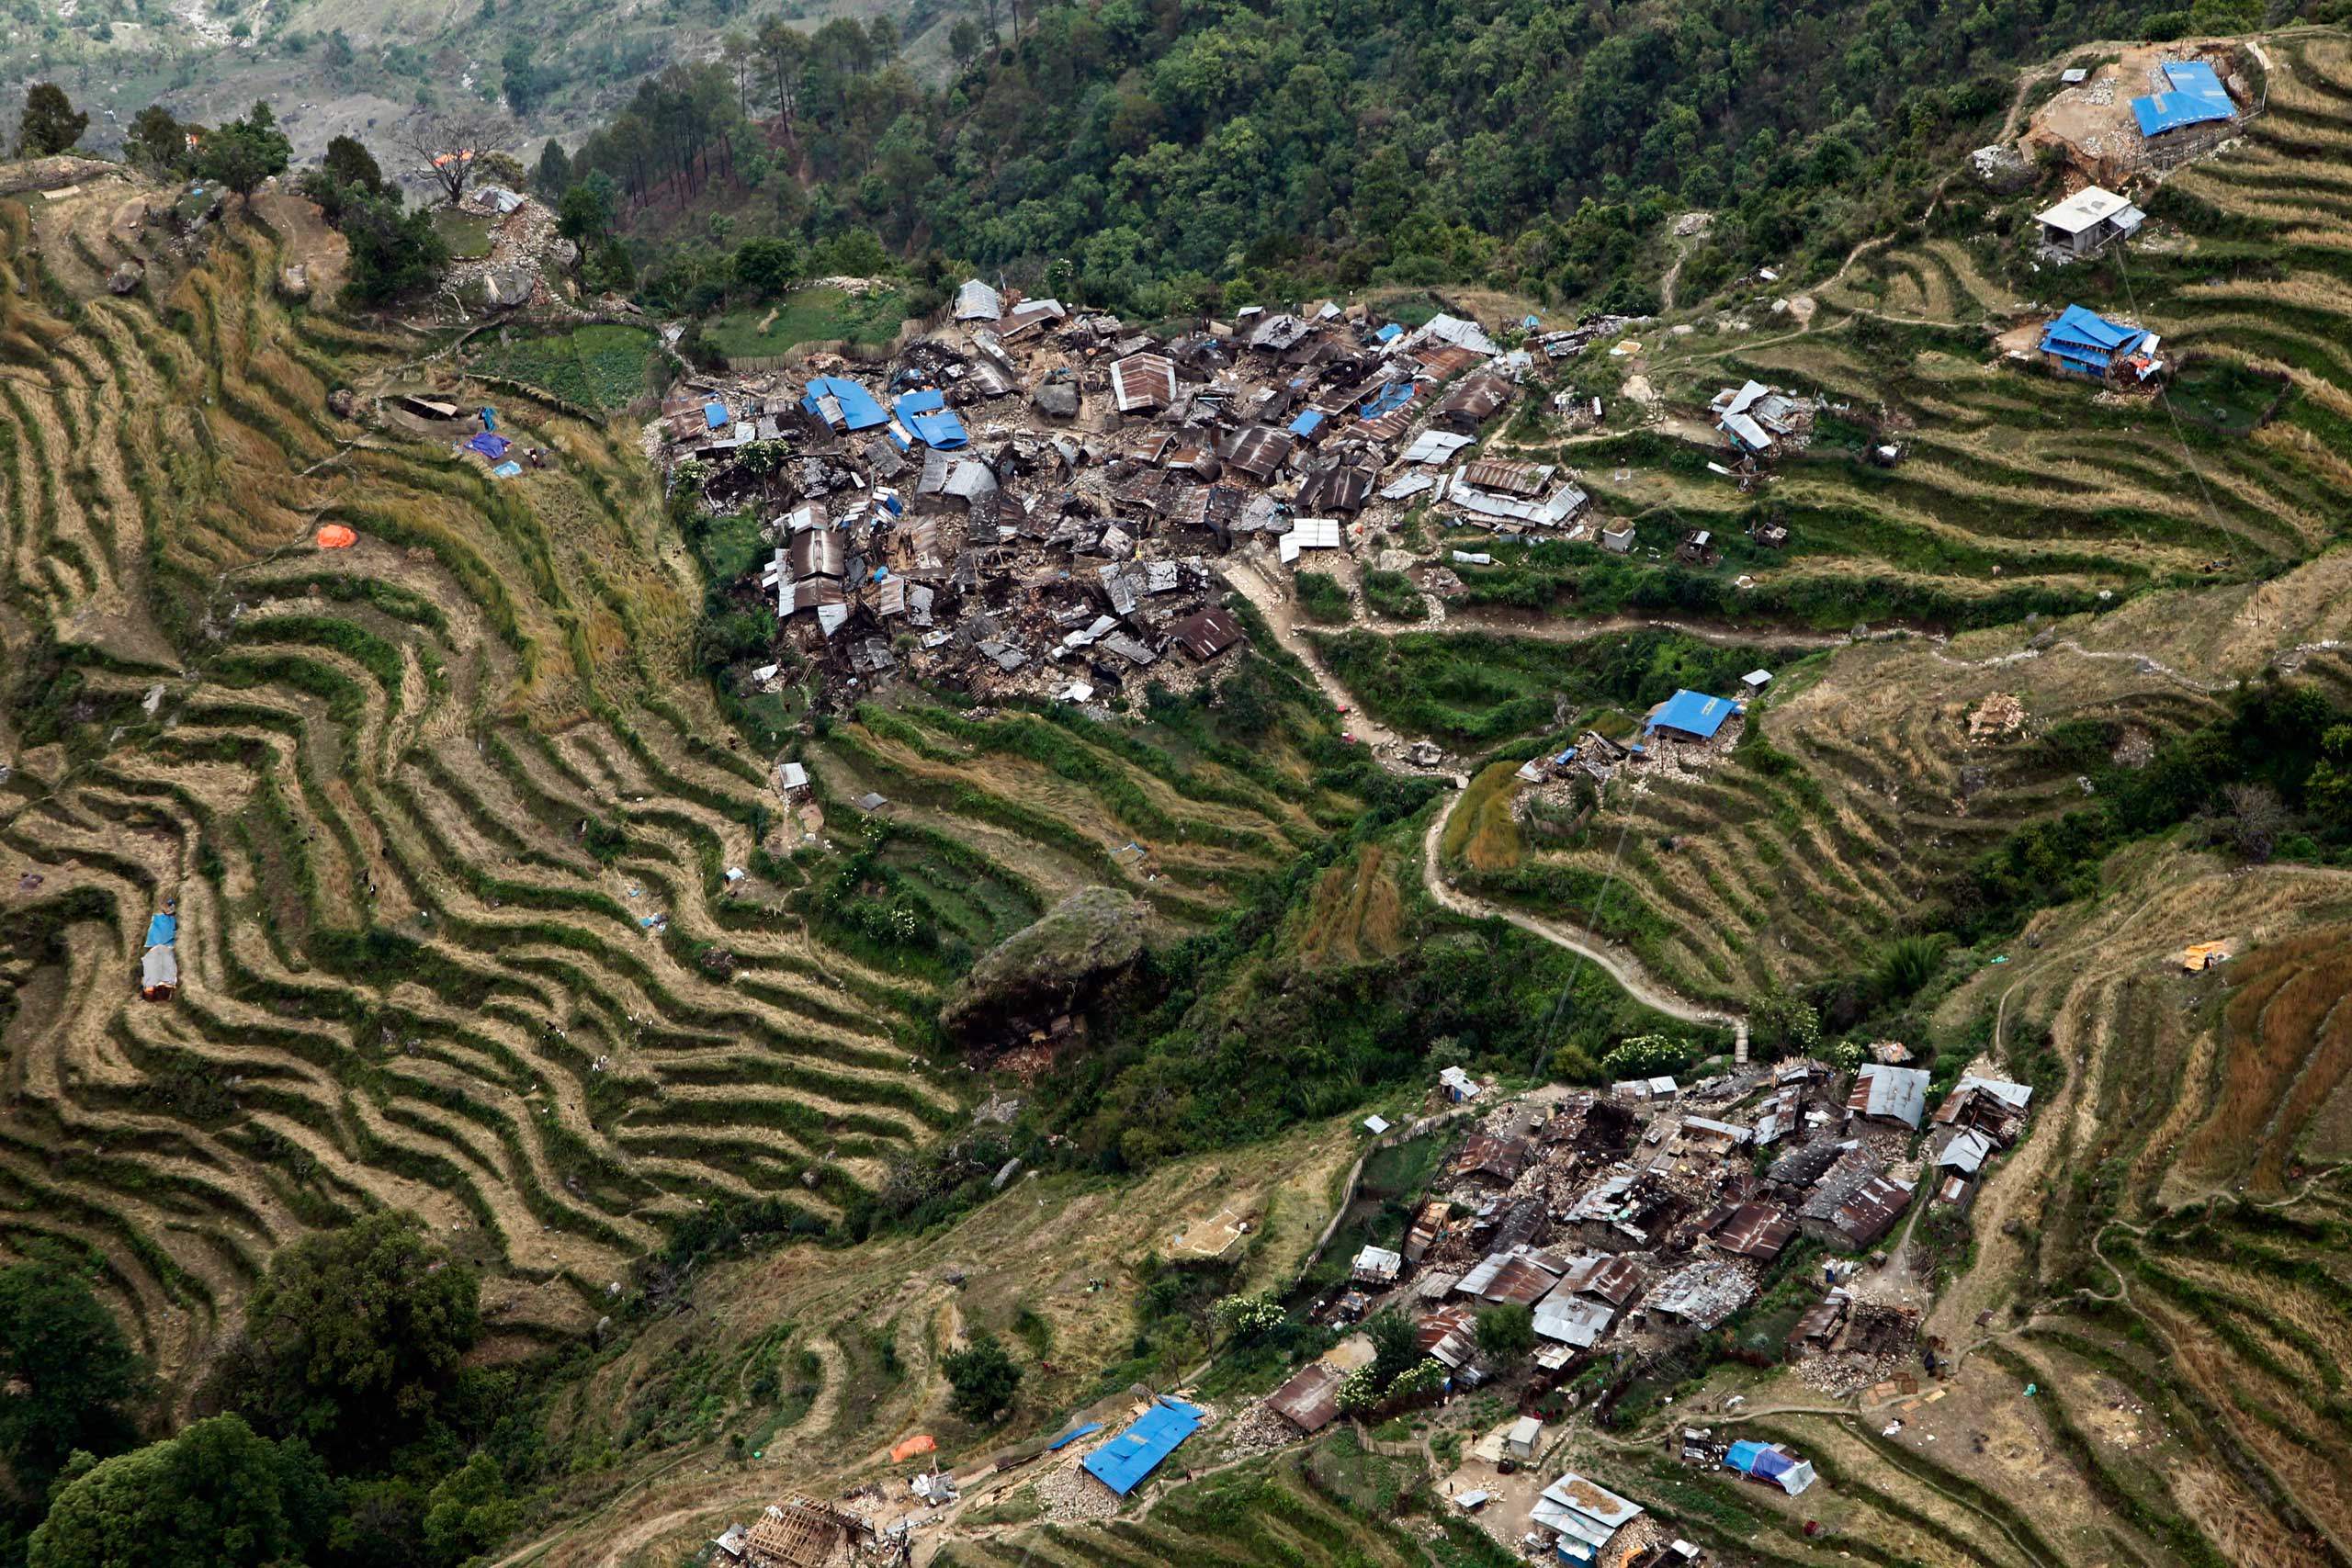 Destroyed villages sit on mountain tops near the epicenter of Saturday's massive earthquake, in the Gorkha District of Nepal on April 29, 2015.